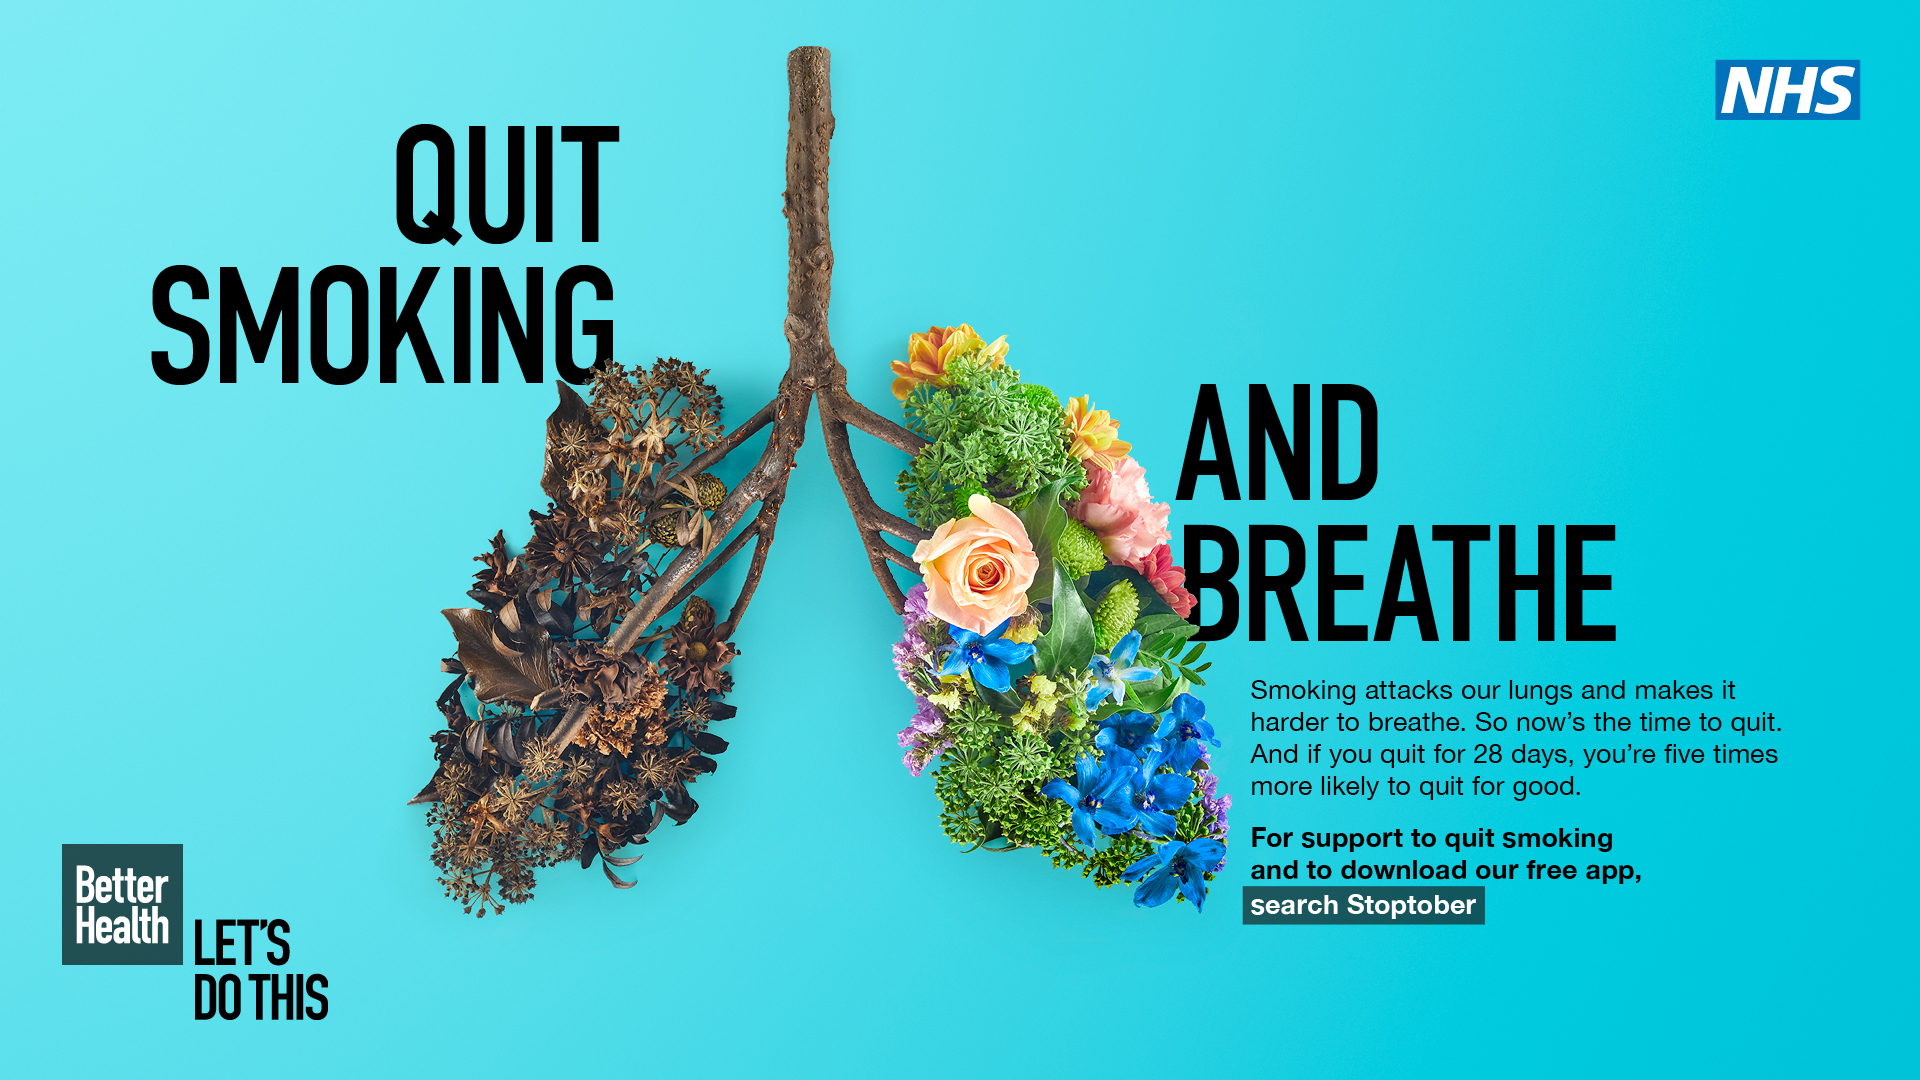 Blue background poster showing human lungs as part of NHS stop smoking campaign